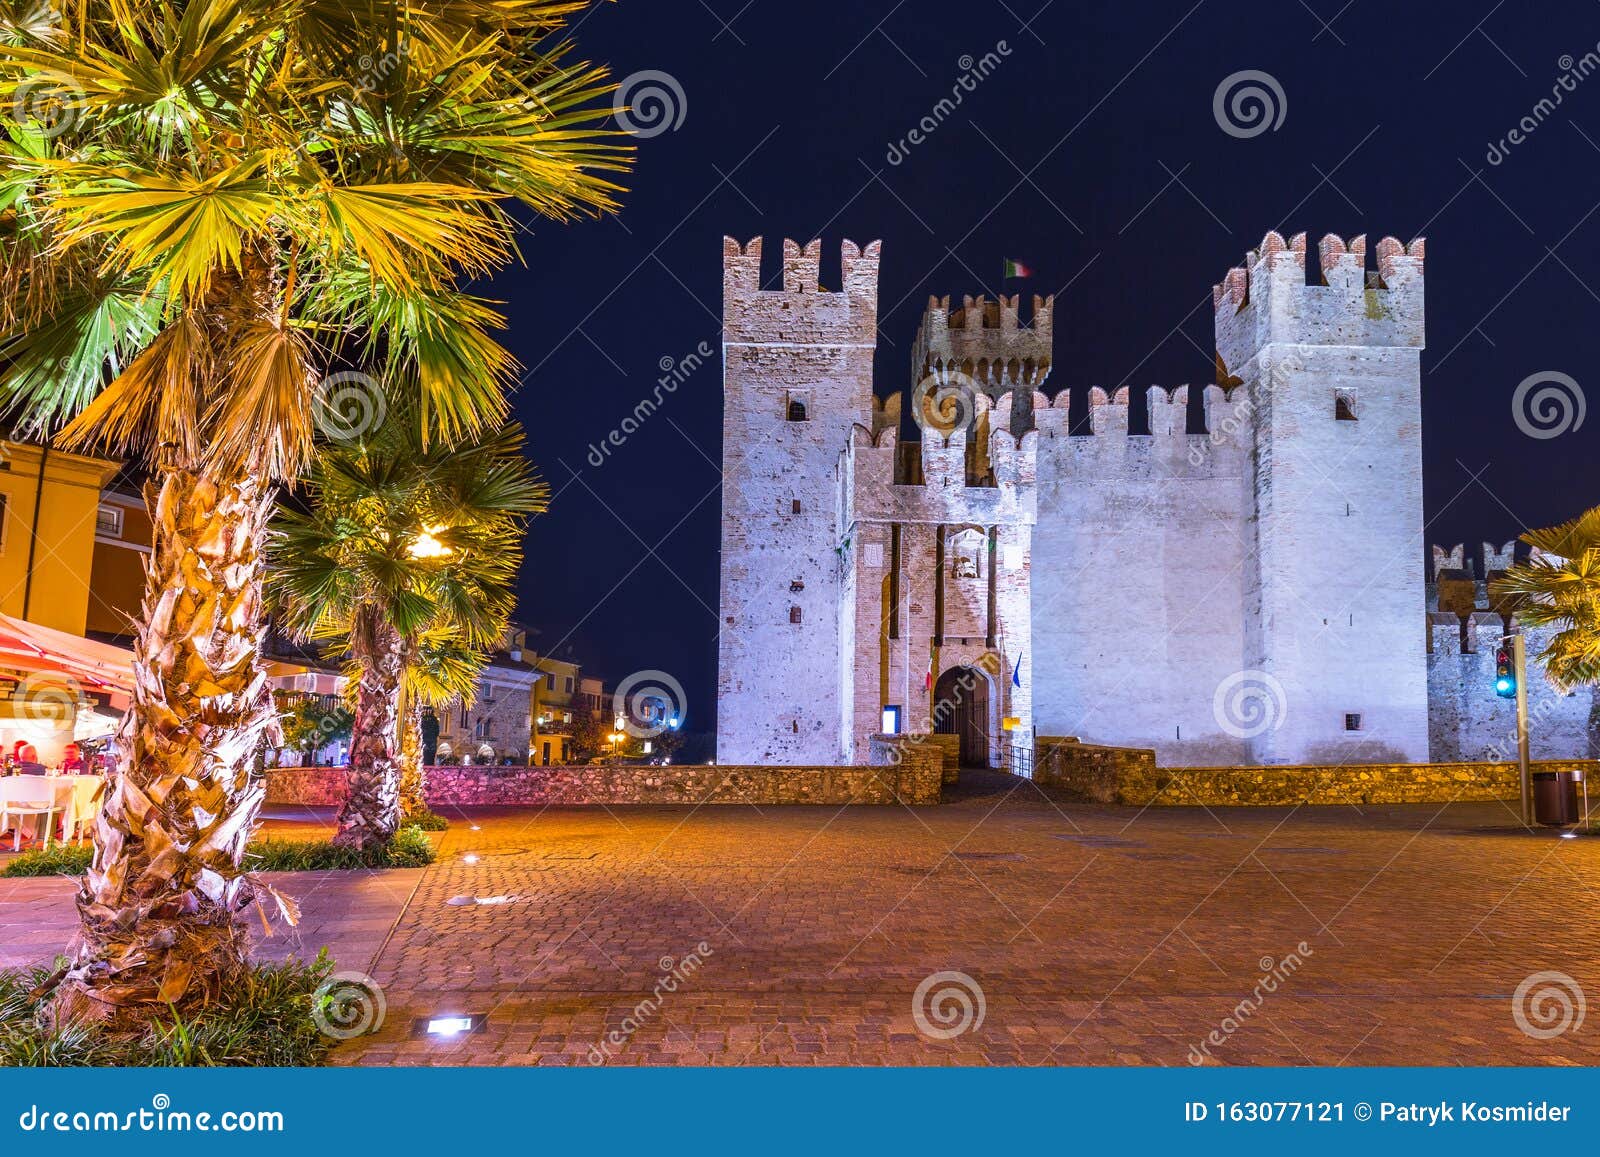 architecture of scaligero castle at garda lake in sirmione, italy